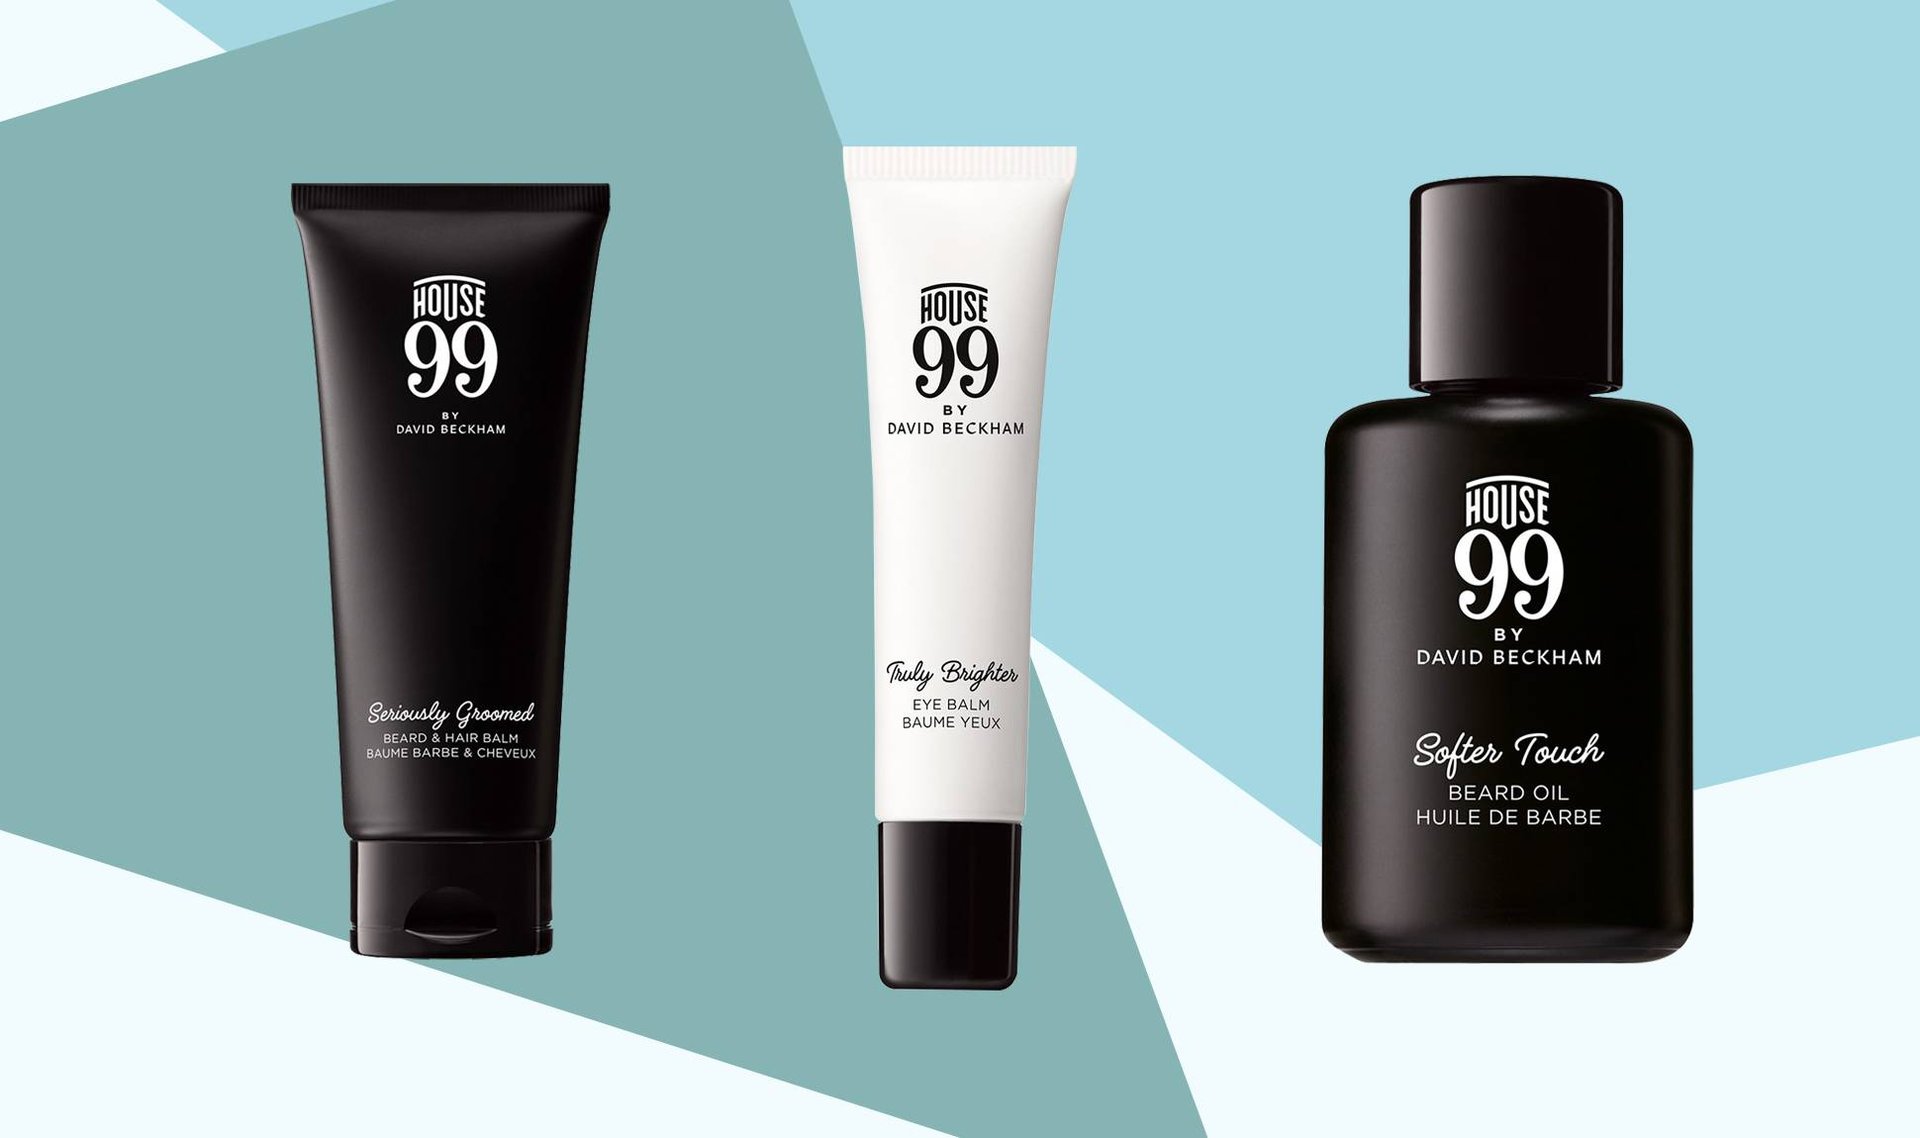 The Top 5 Best-Selling House 99 Products for Men